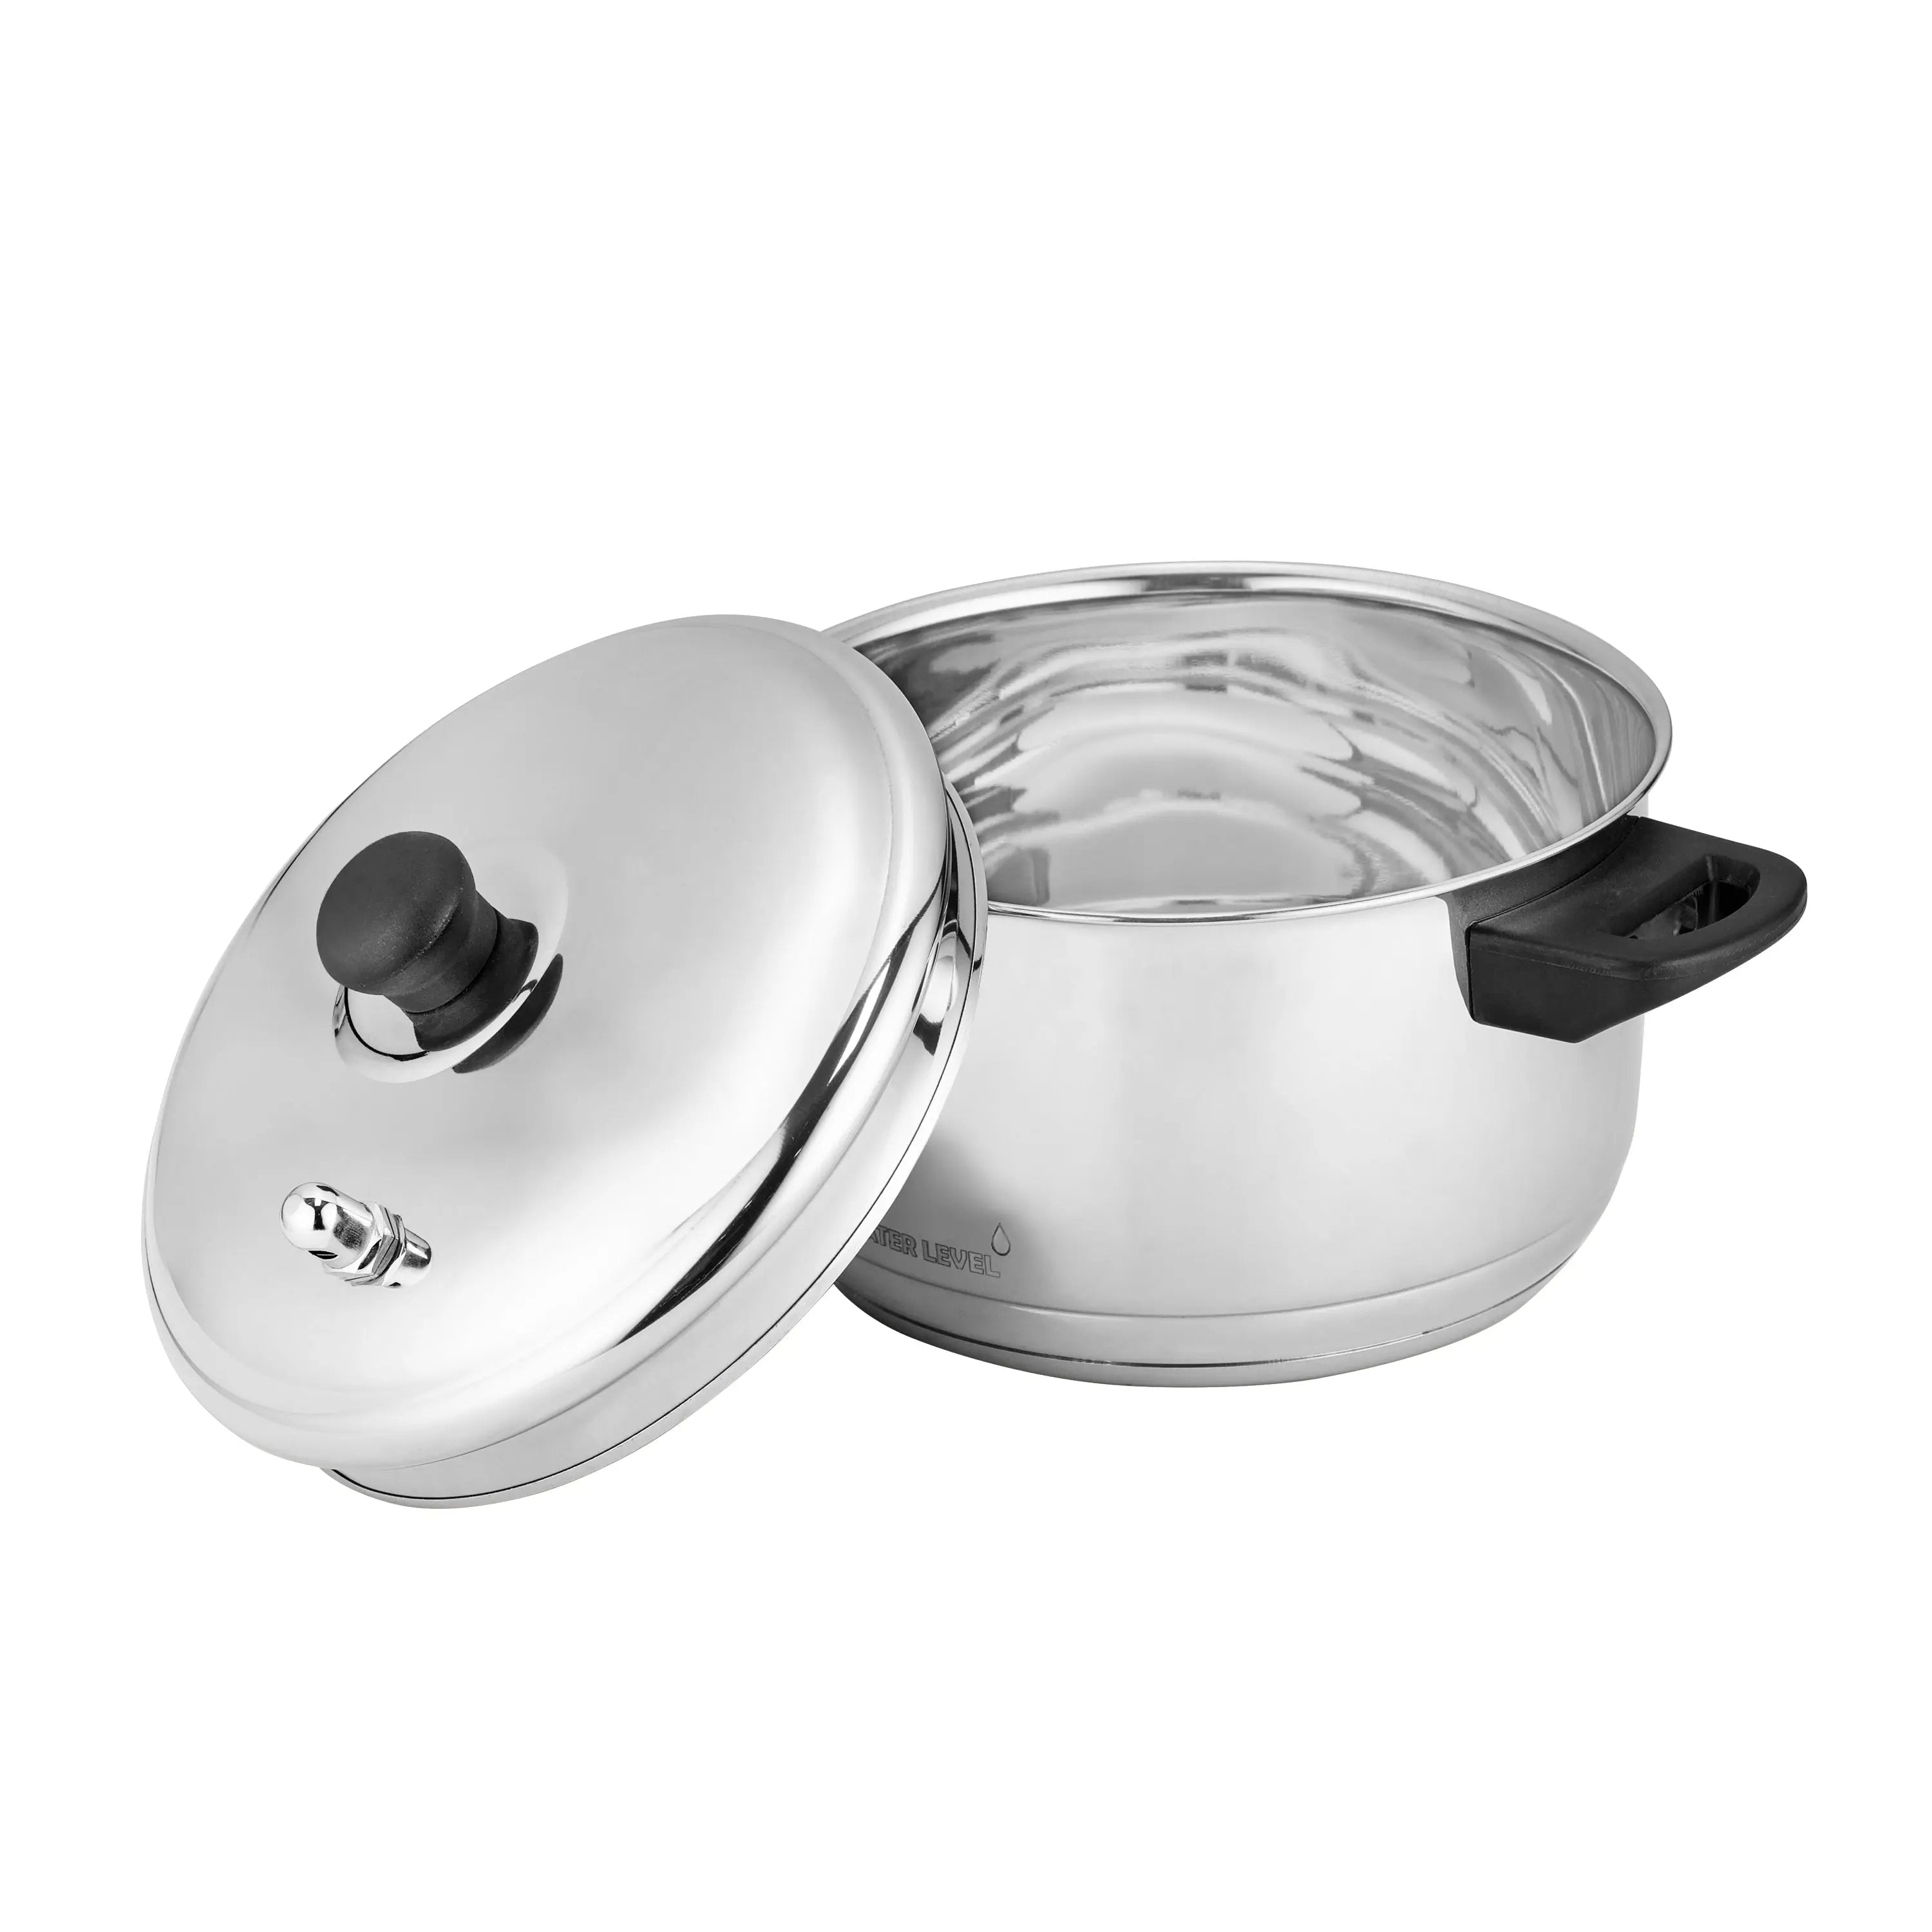 STAINLESS STEEL IDLY COOKER 4 LAYER - CROCKERY WALA AND COMPANY 